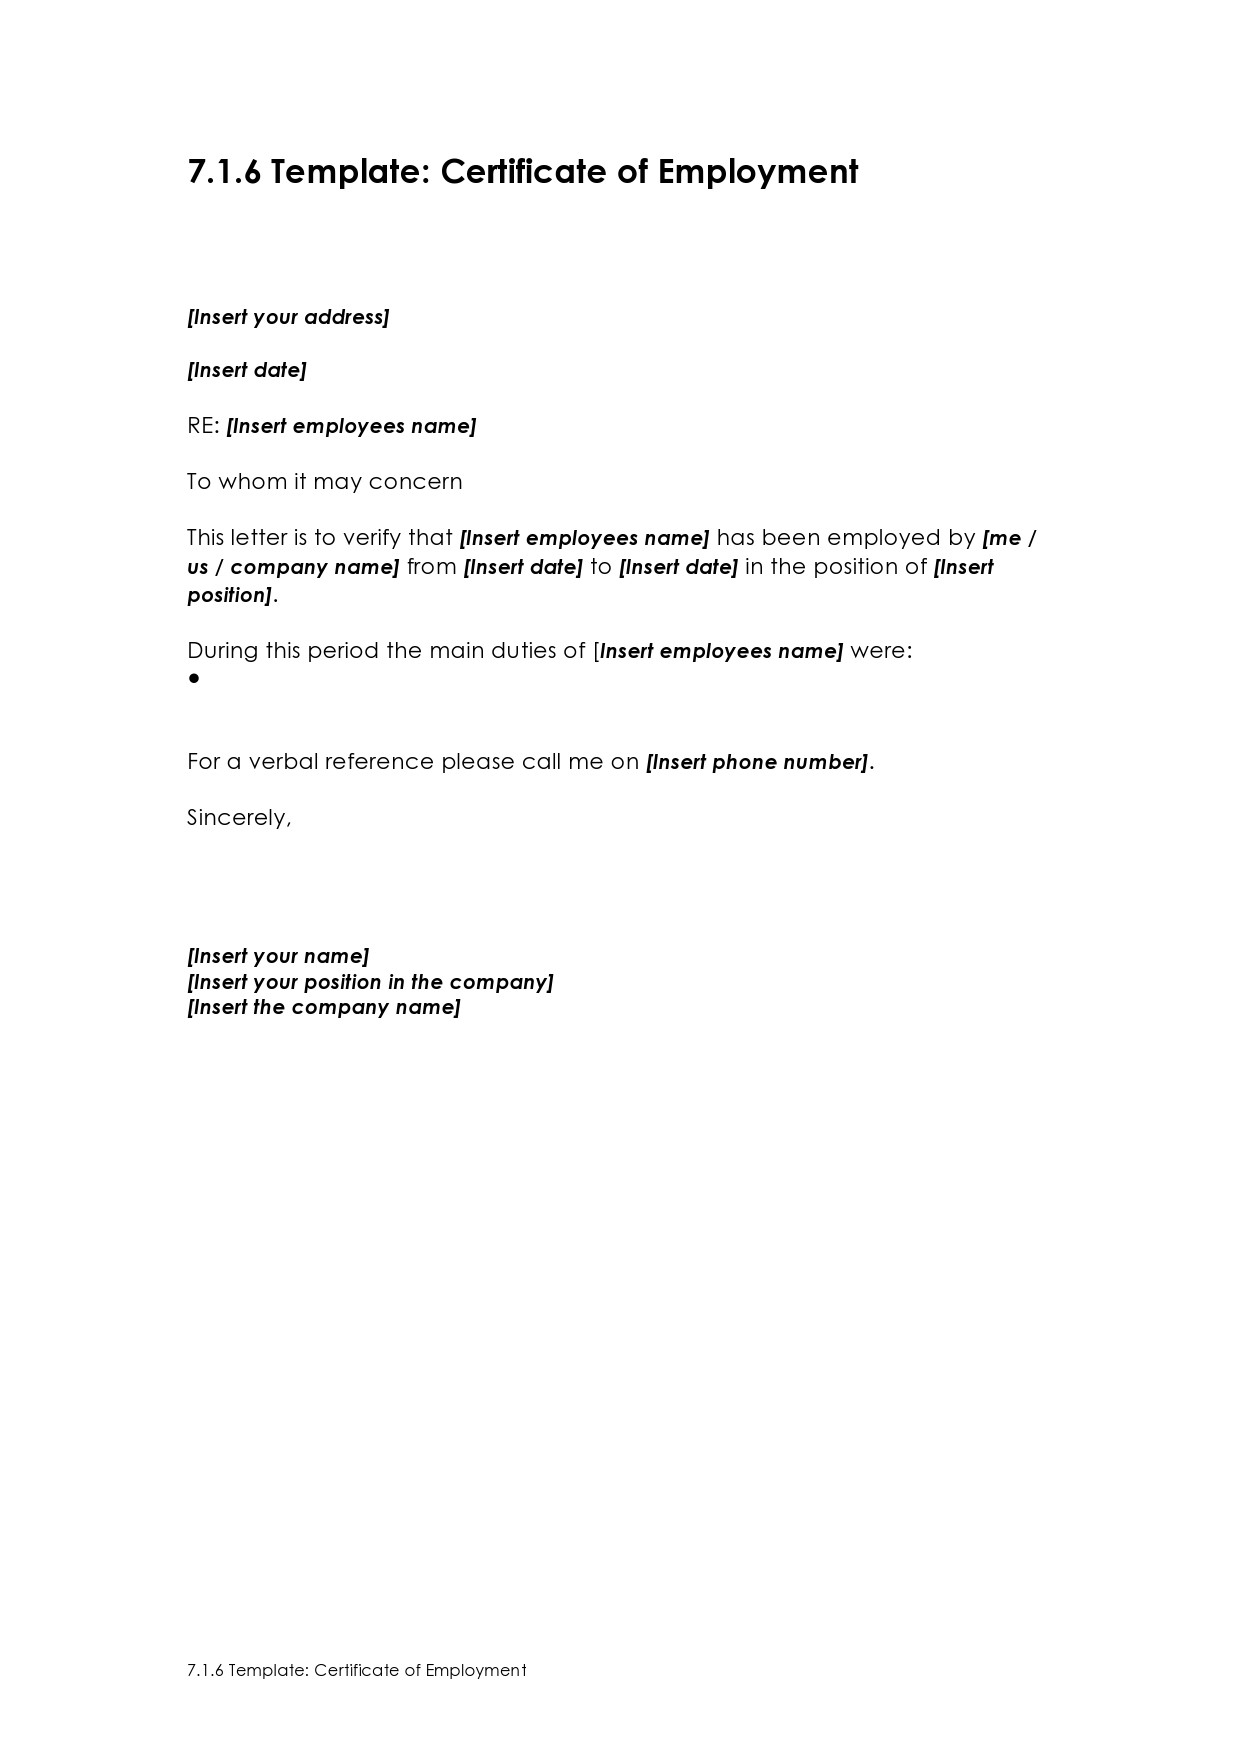 an application letter for certificate